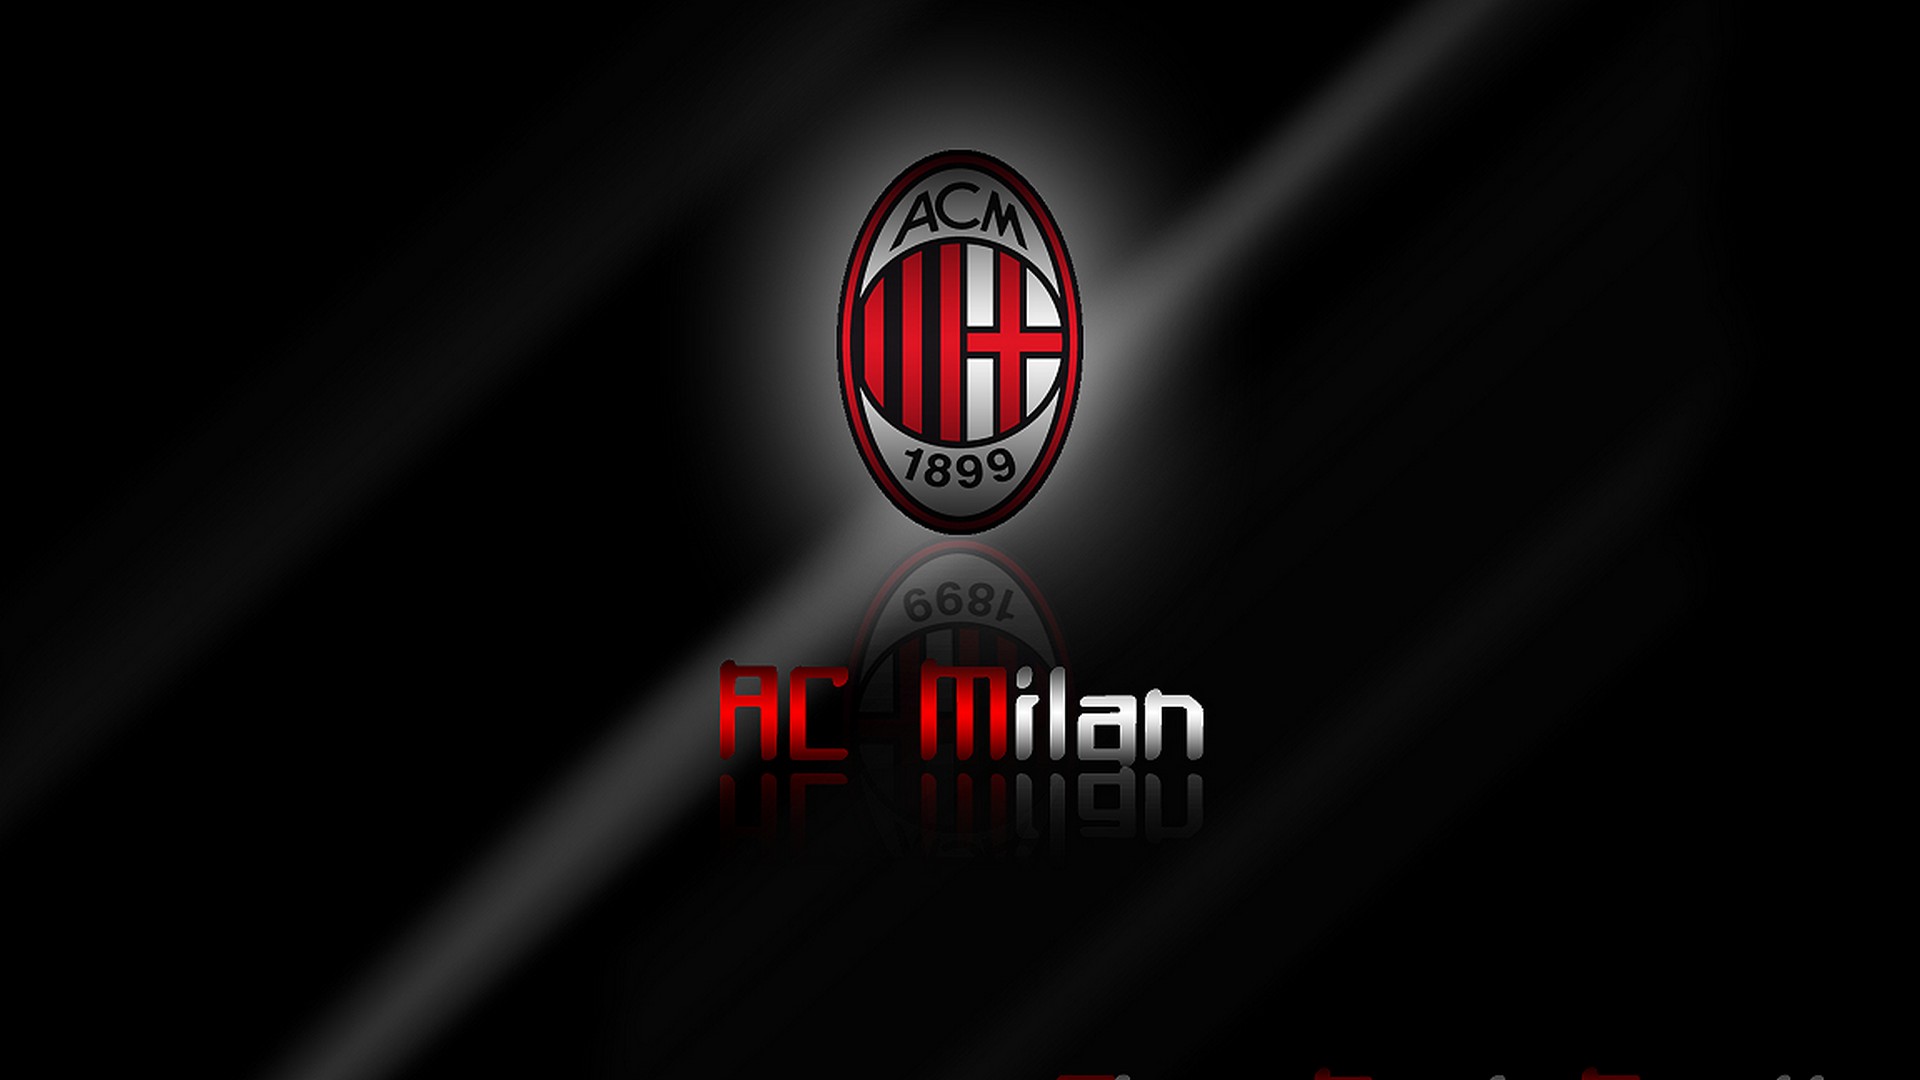 Windows Wallpaper AC Milan With high-resolution 1920X1080 pixel. You can use this wallpaper for your Desktop Computers, Mac Screensavers, Windows Backgrounds, iPhone Wallpapers, Tablet or Android Lock screen and another Mobile device